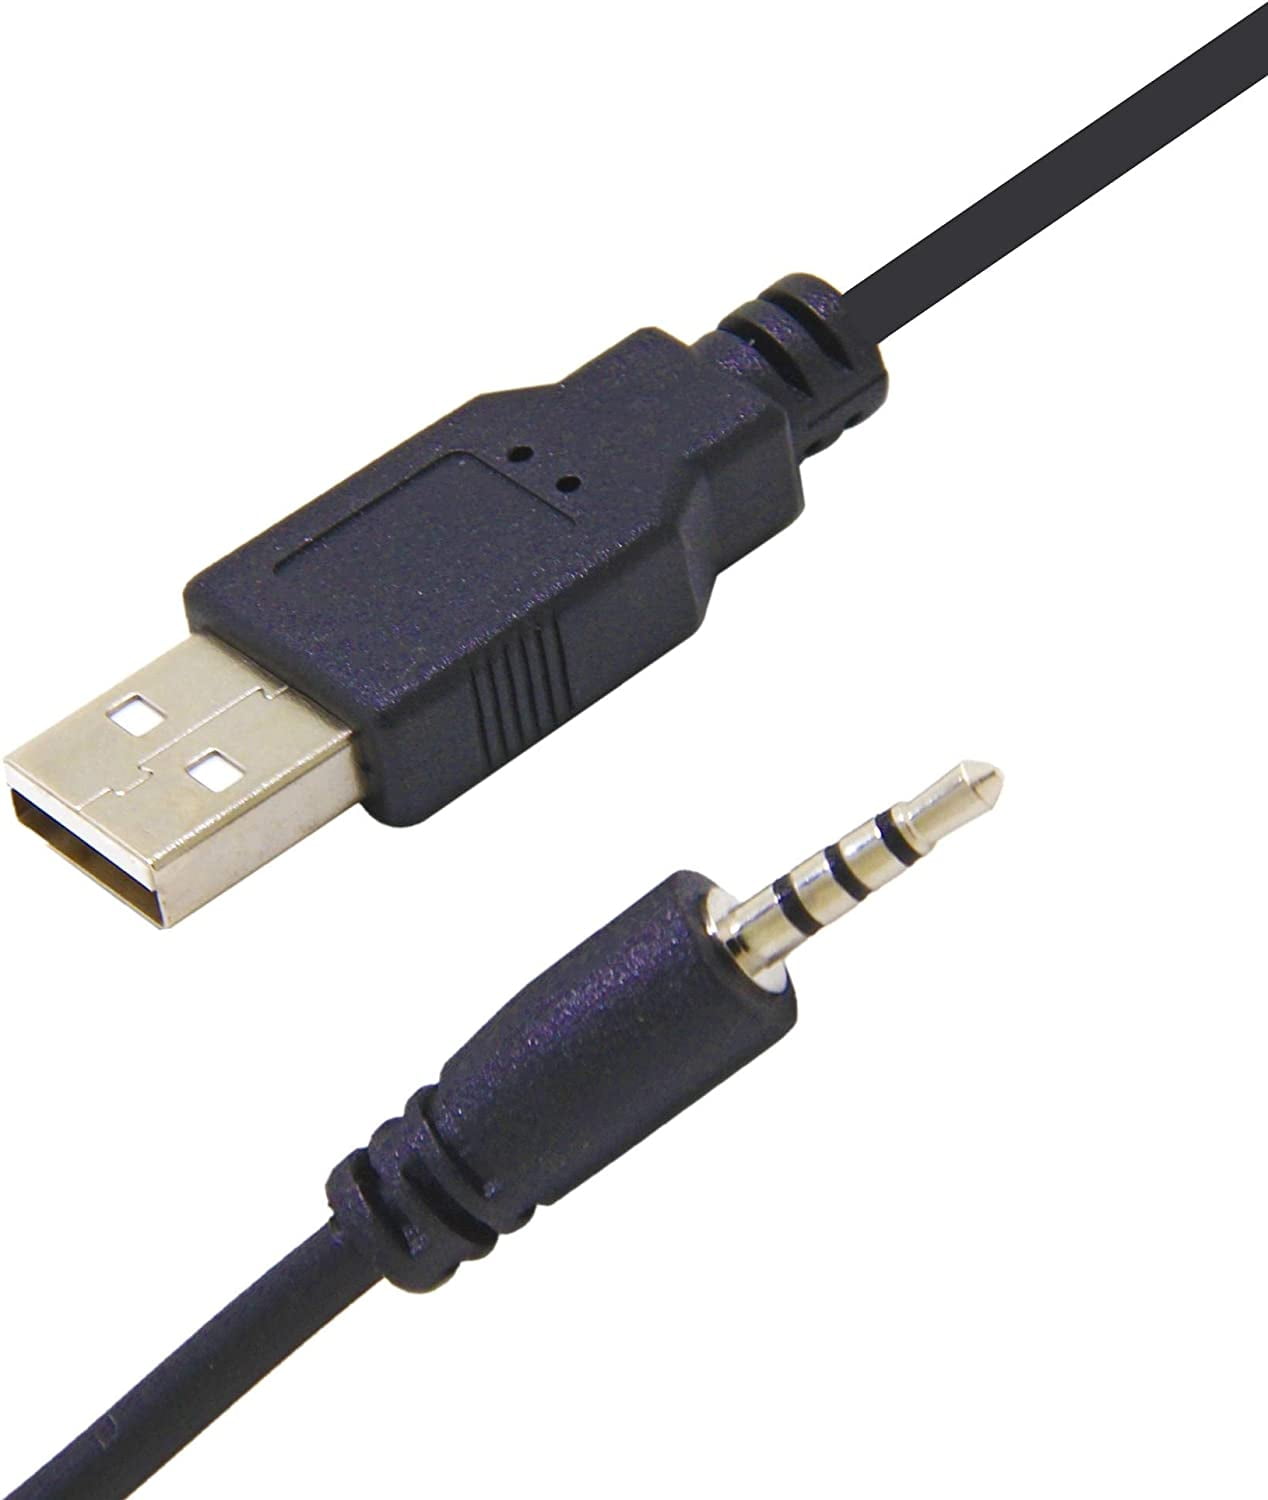 USB to 2.5mm Male, Headphone Charger for JBL Synchros E30 E40BT E45BT E50BT EB40 S400BT S400 S500 Walmart.com